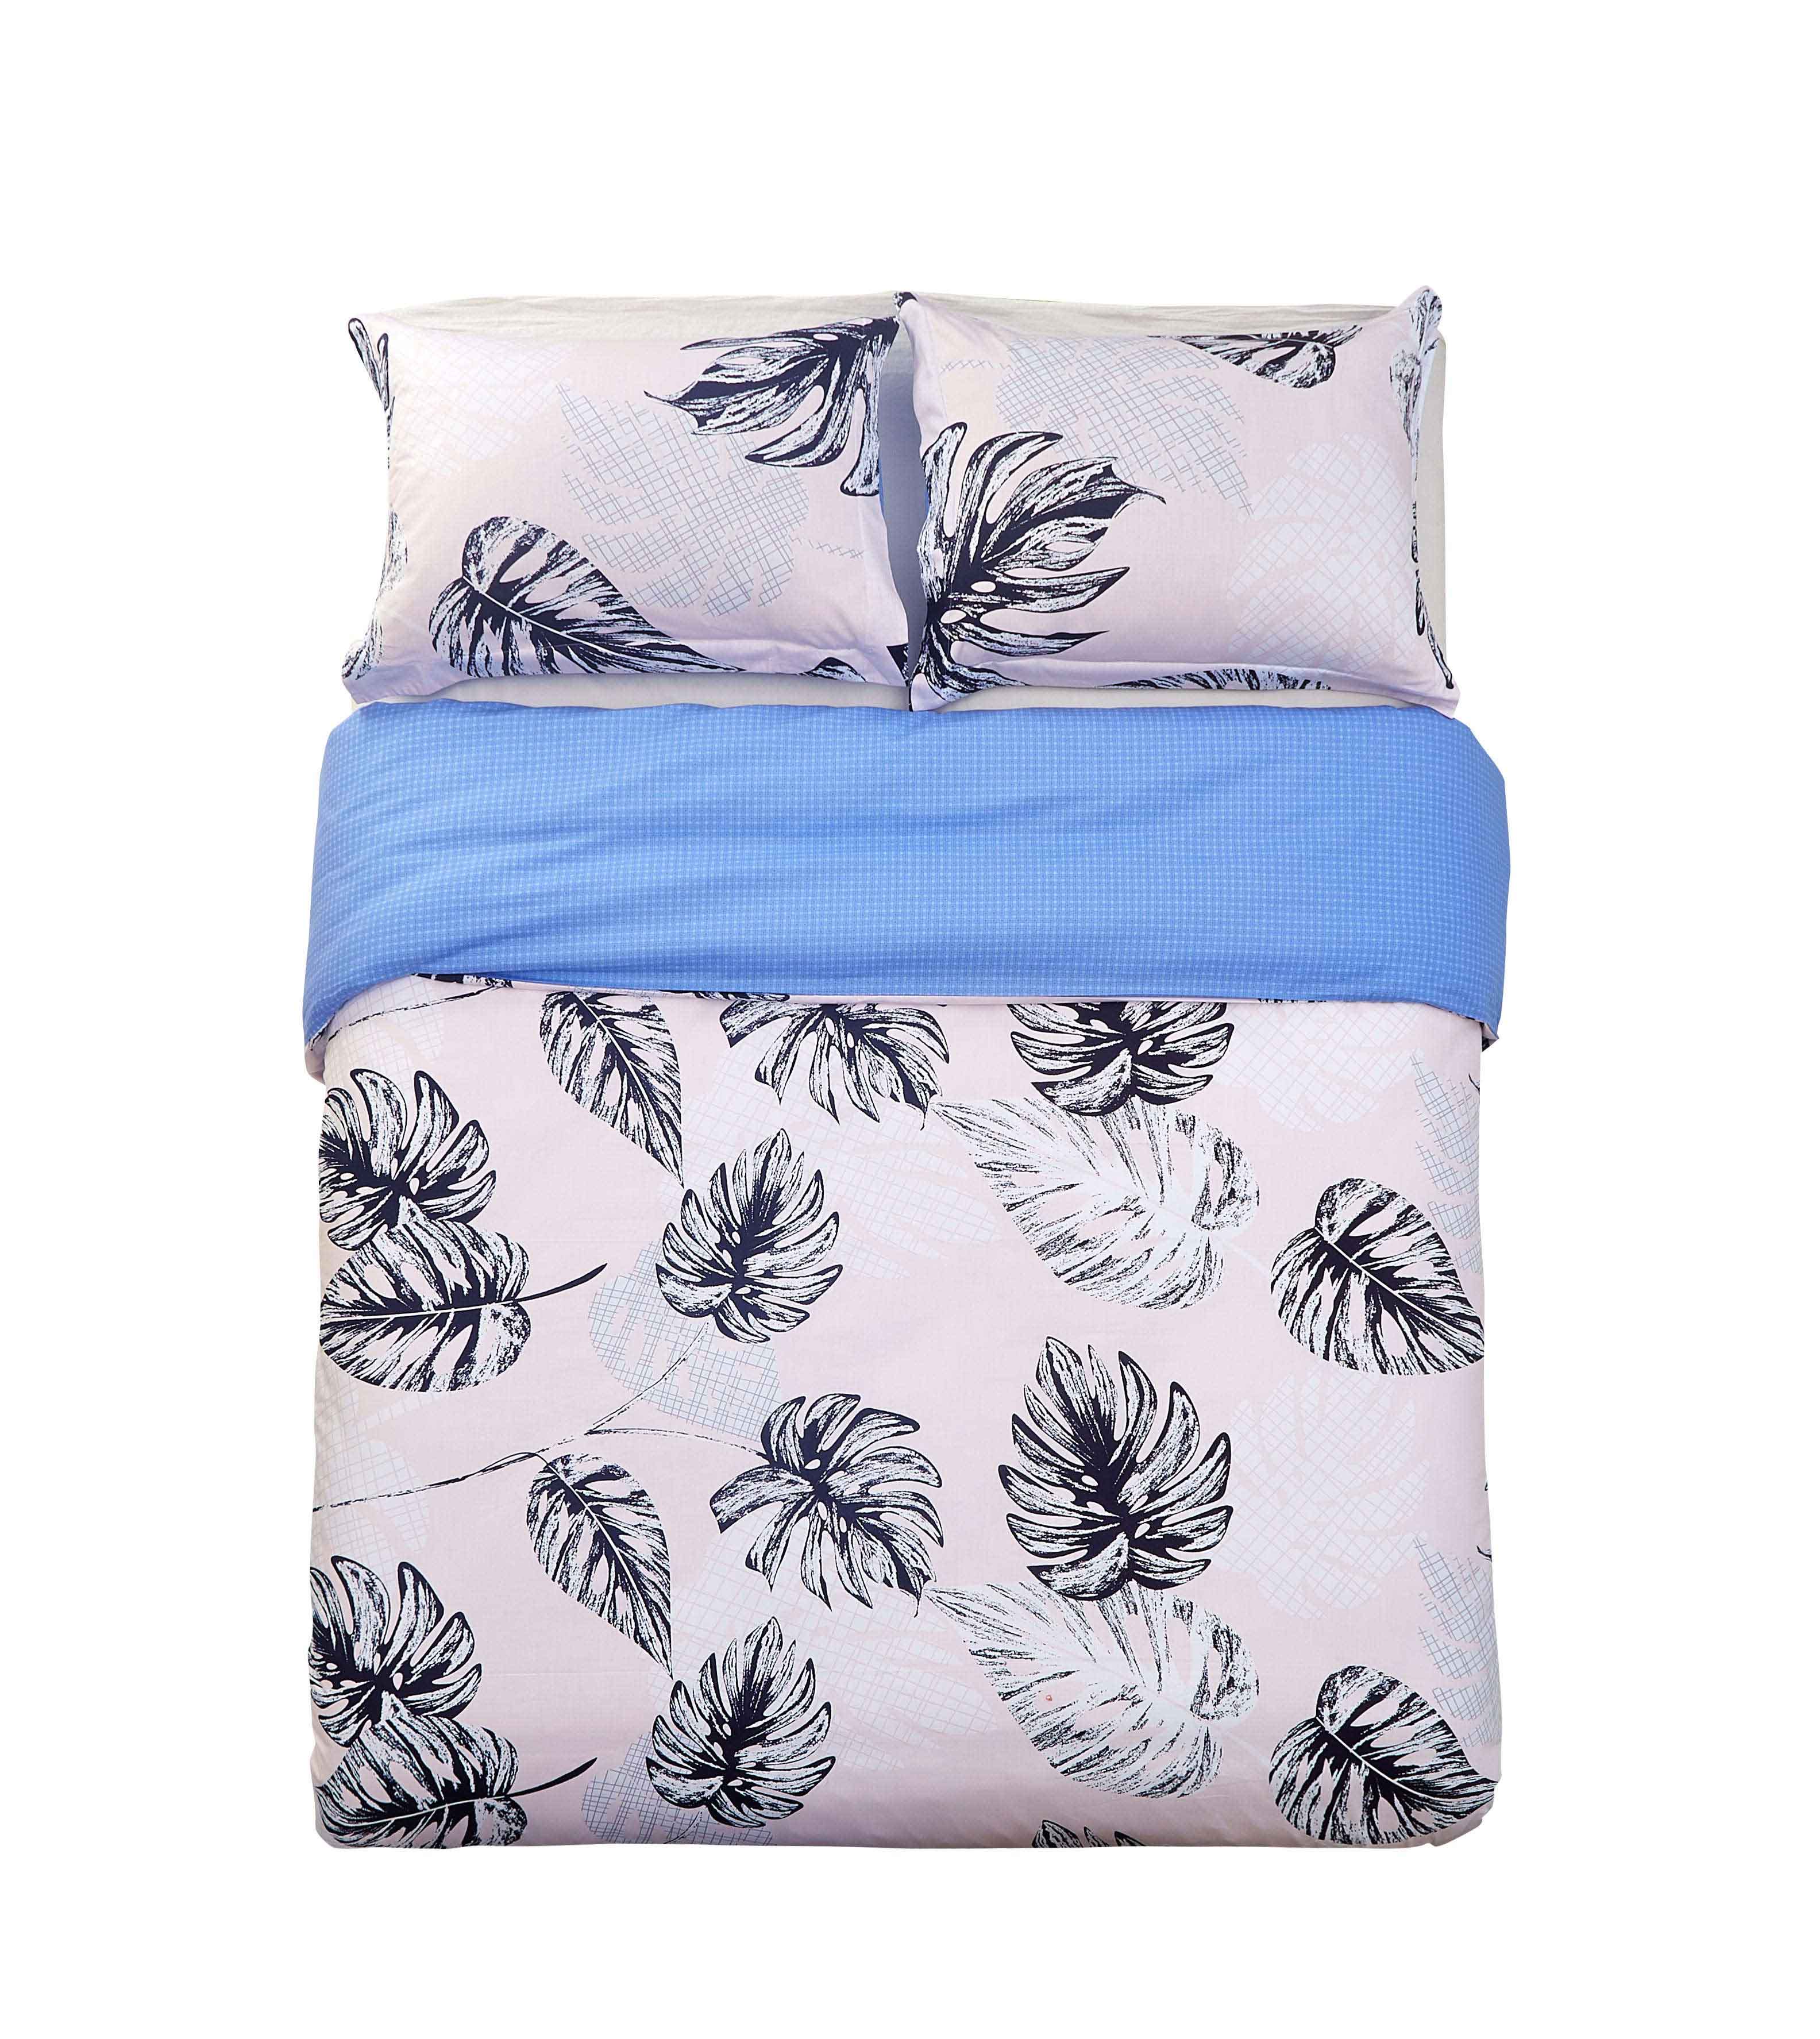 Duvet Cover Sets 3 PC 250TC 100% Cotton Leaves Pattern Print Soft Lightweight, Full/Queen